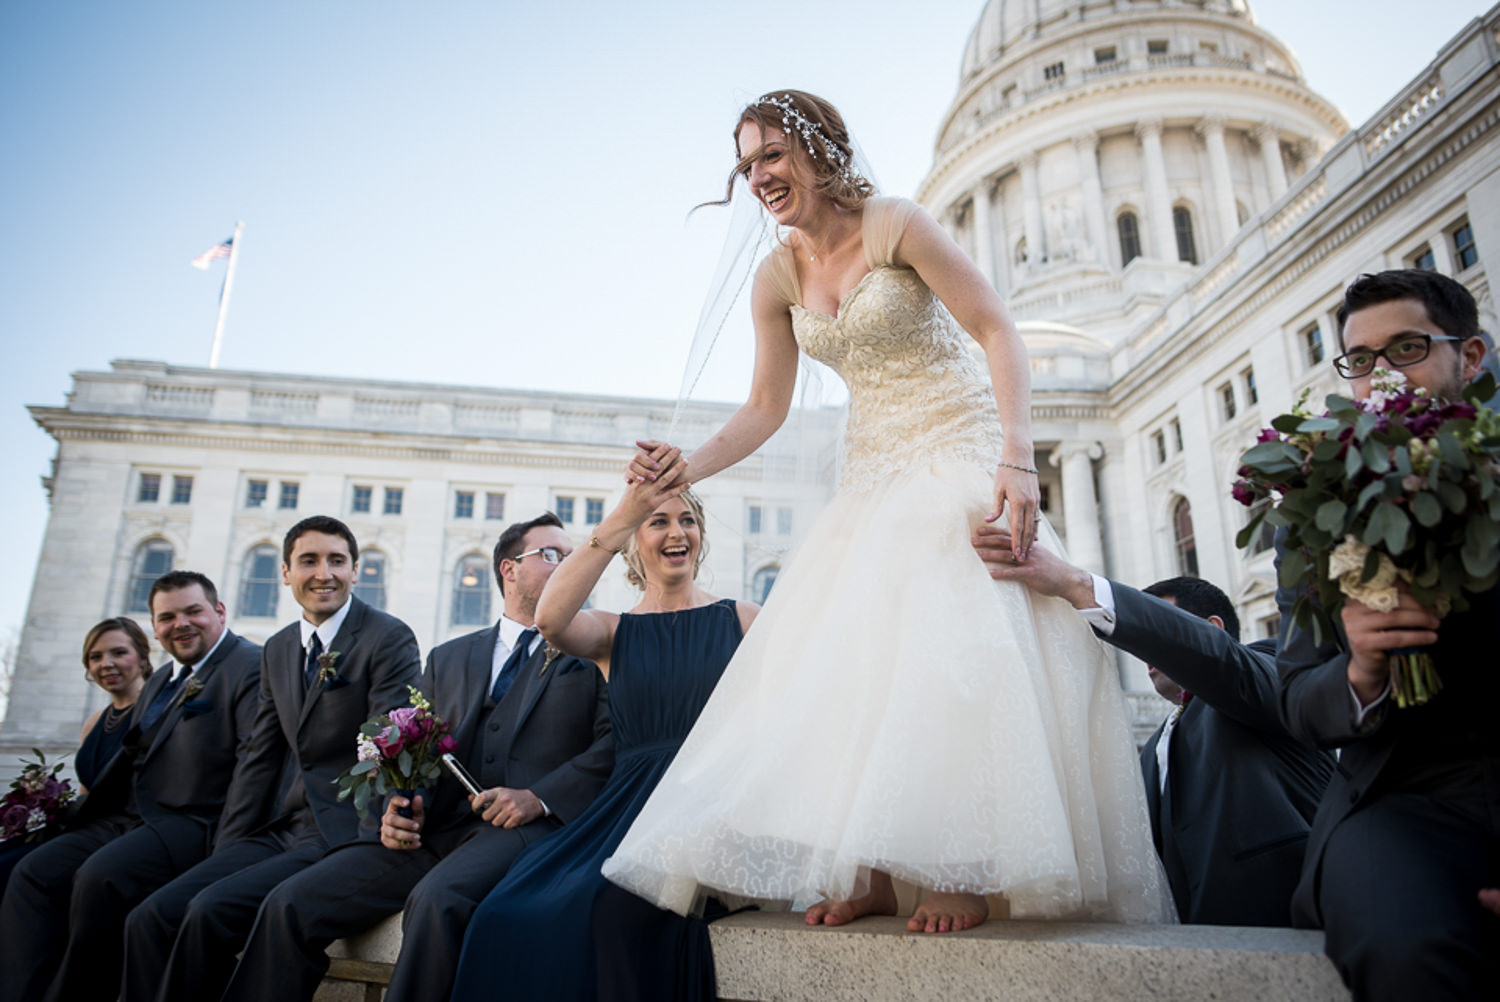 capital wedding best madison wisconsin wedding photographers artistic natural real